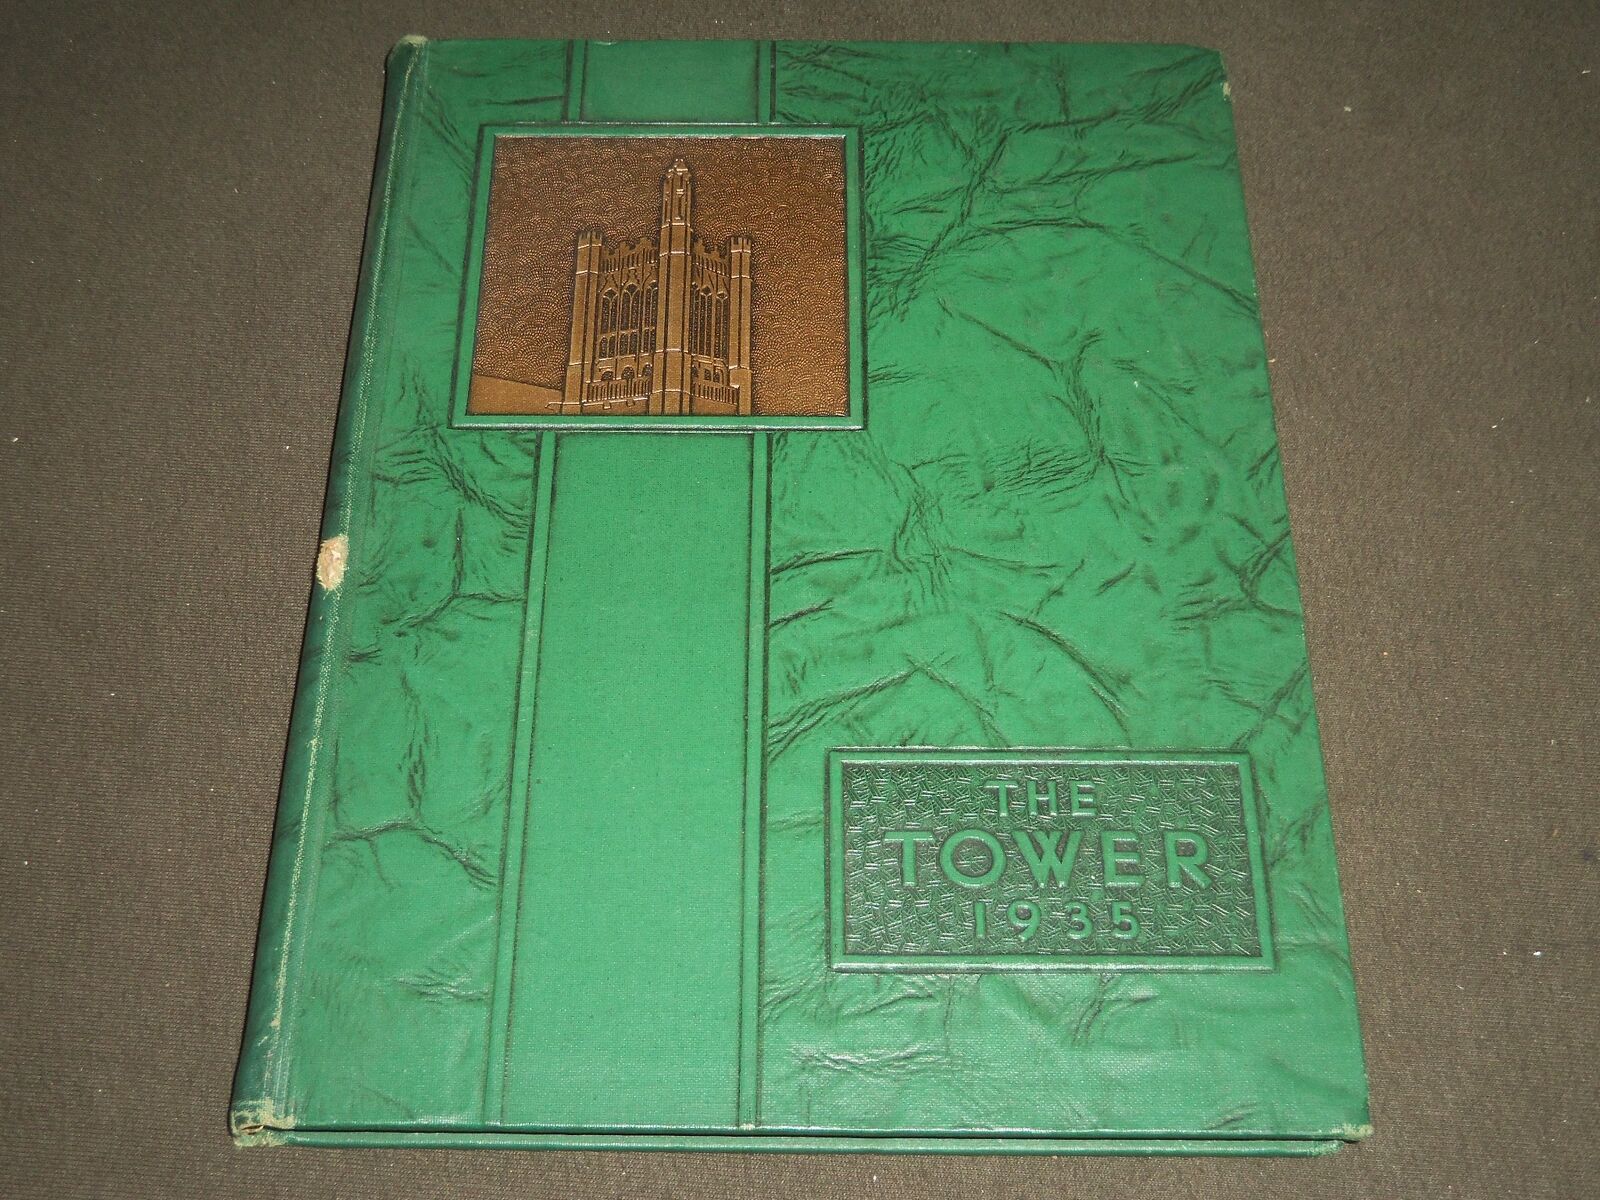 1935 TOWER JERSEY CITY STATE NORMAL SCHOOL YEARBOOK - NEW JERSEY - YB 1157